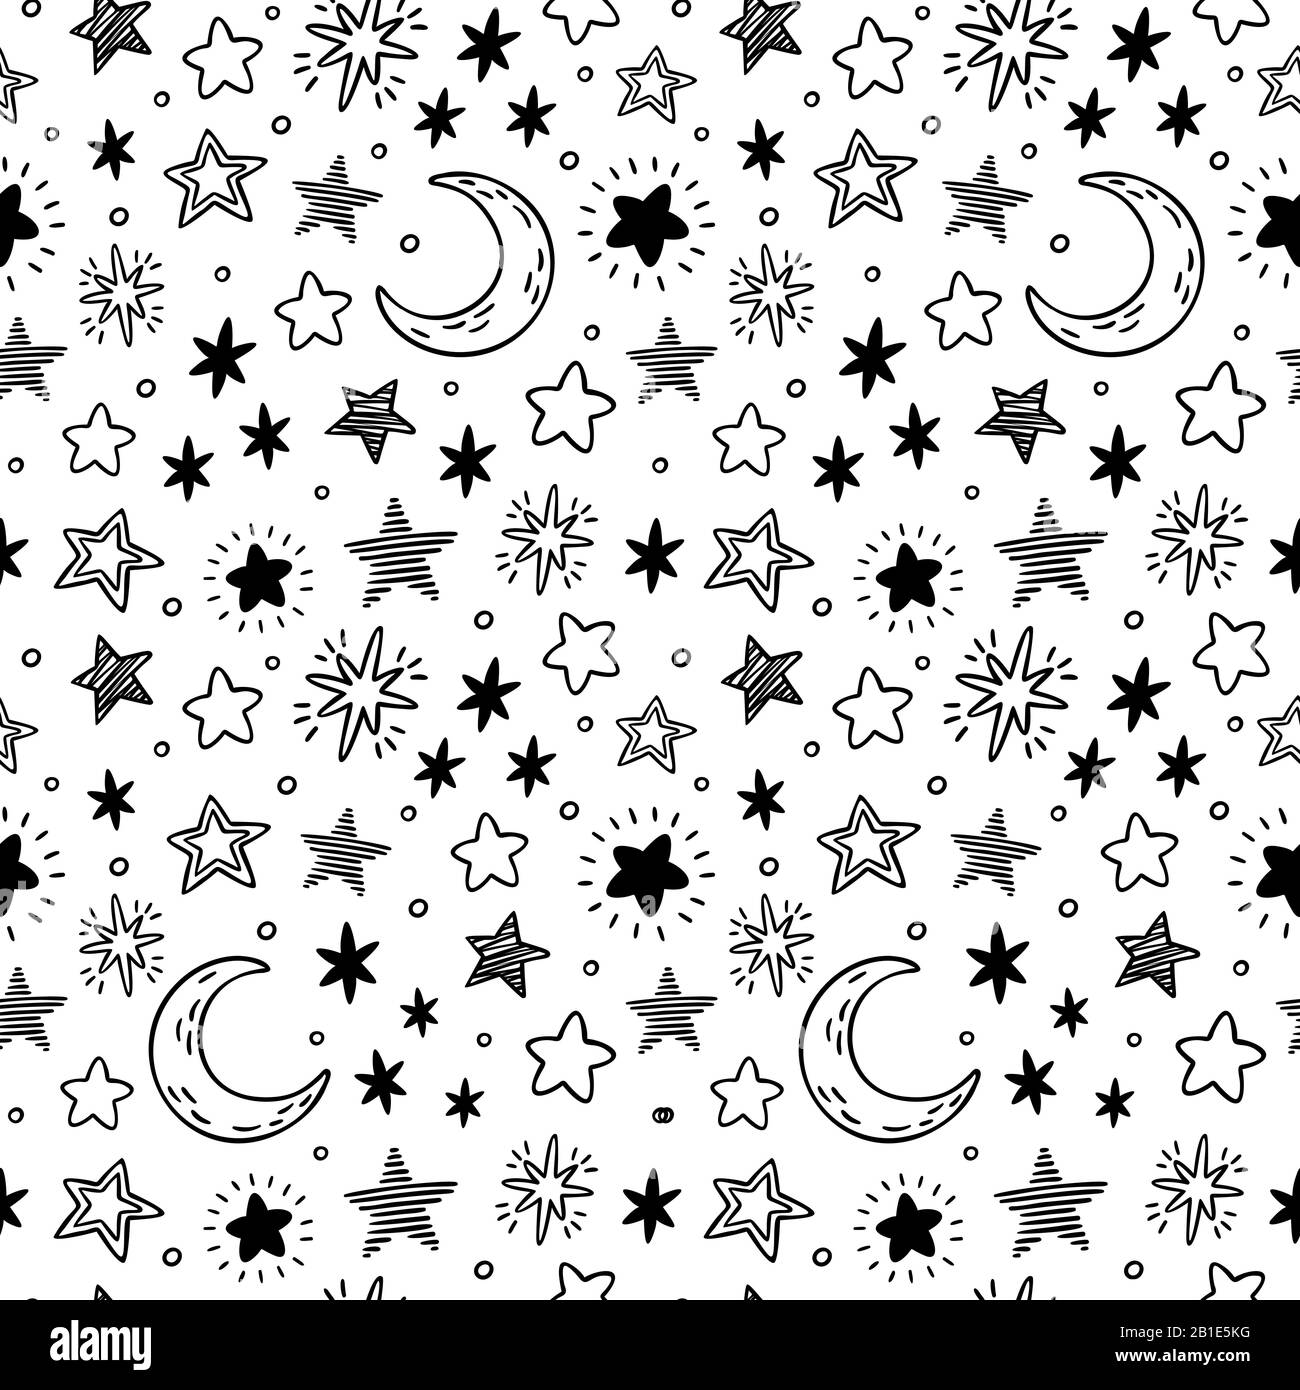 Seamless hand drawn stars. Starry sky sketch, doodle star and night vector pattern illustration Stock Vector